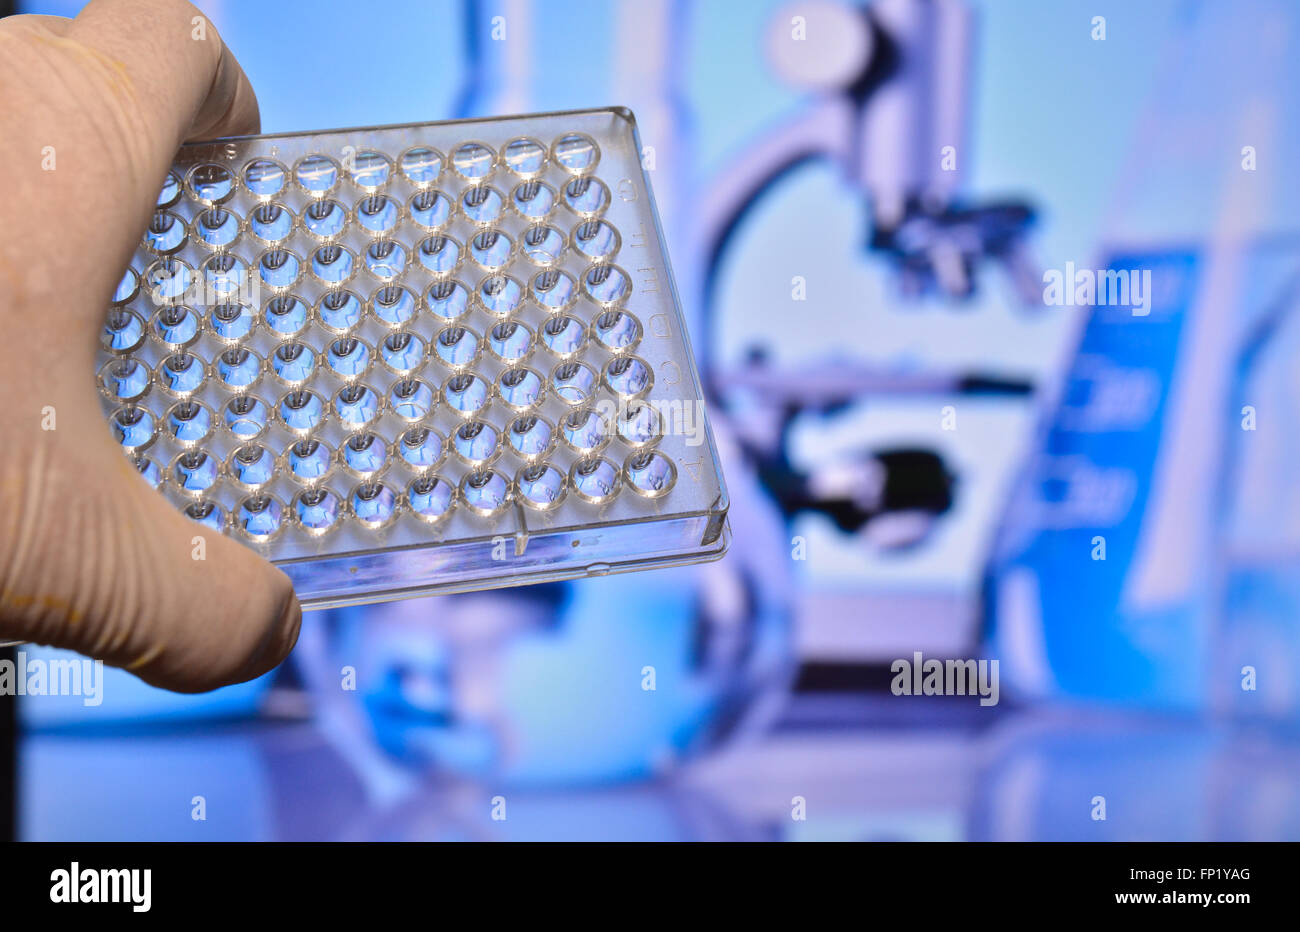 Well plate in the lab. Scientific research in the modern biological laboratory. Stock Photo